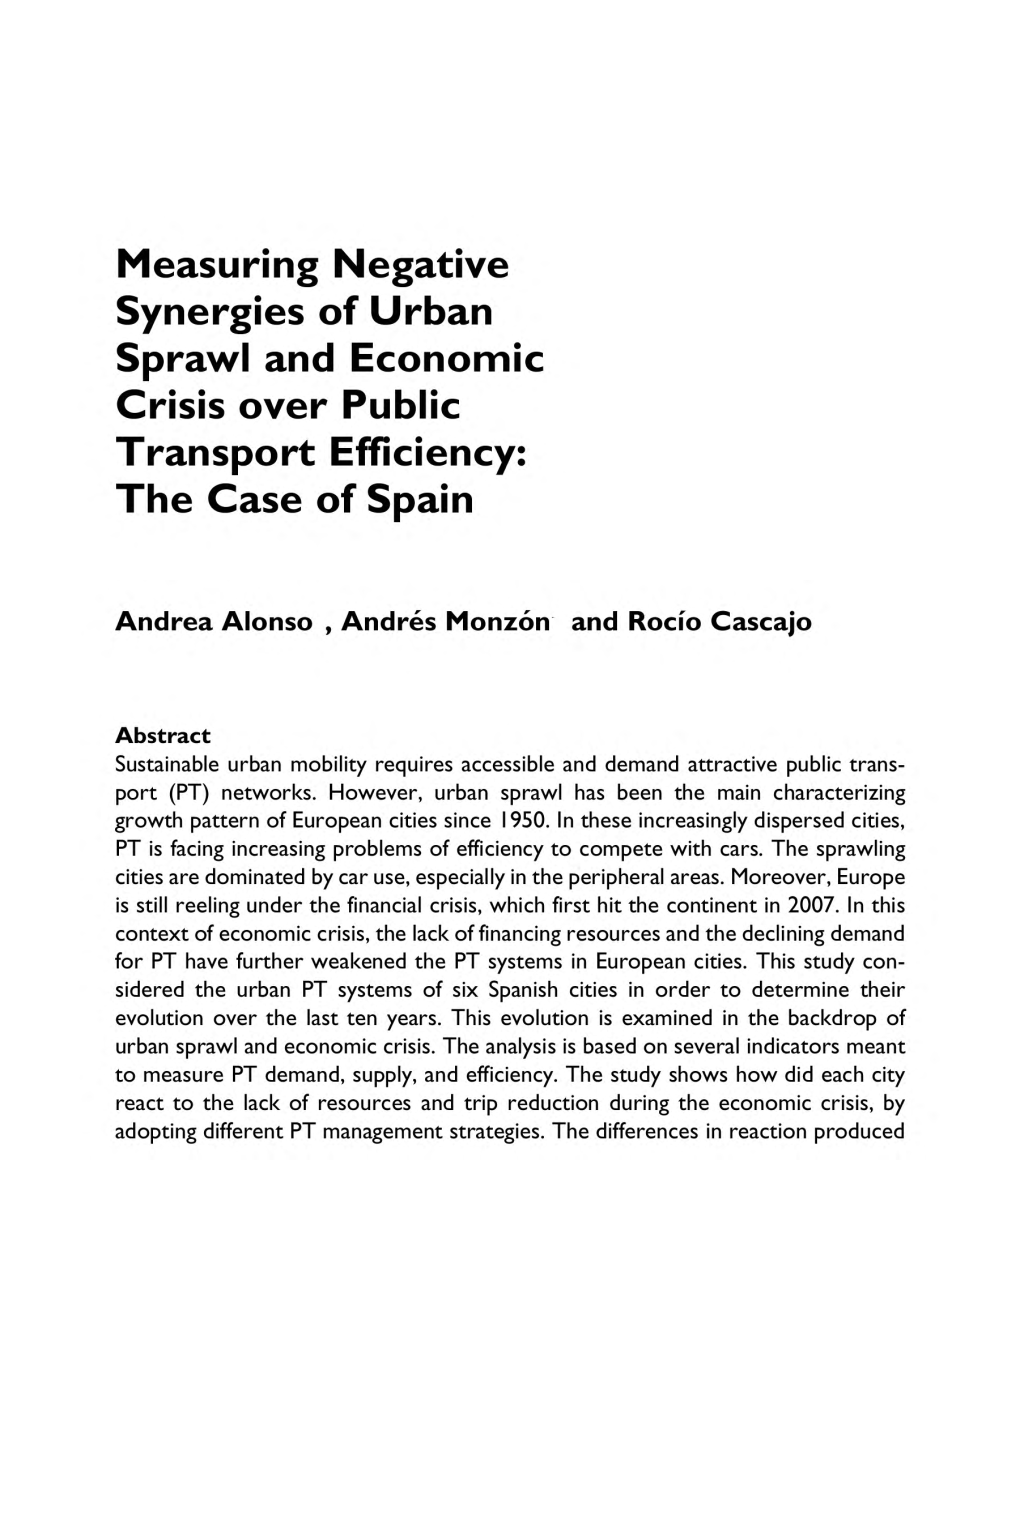 Measuring Negative Synergies of Urban Sprawl and Economic Crisis Over Public Transport Efficiency: the Case of Spain